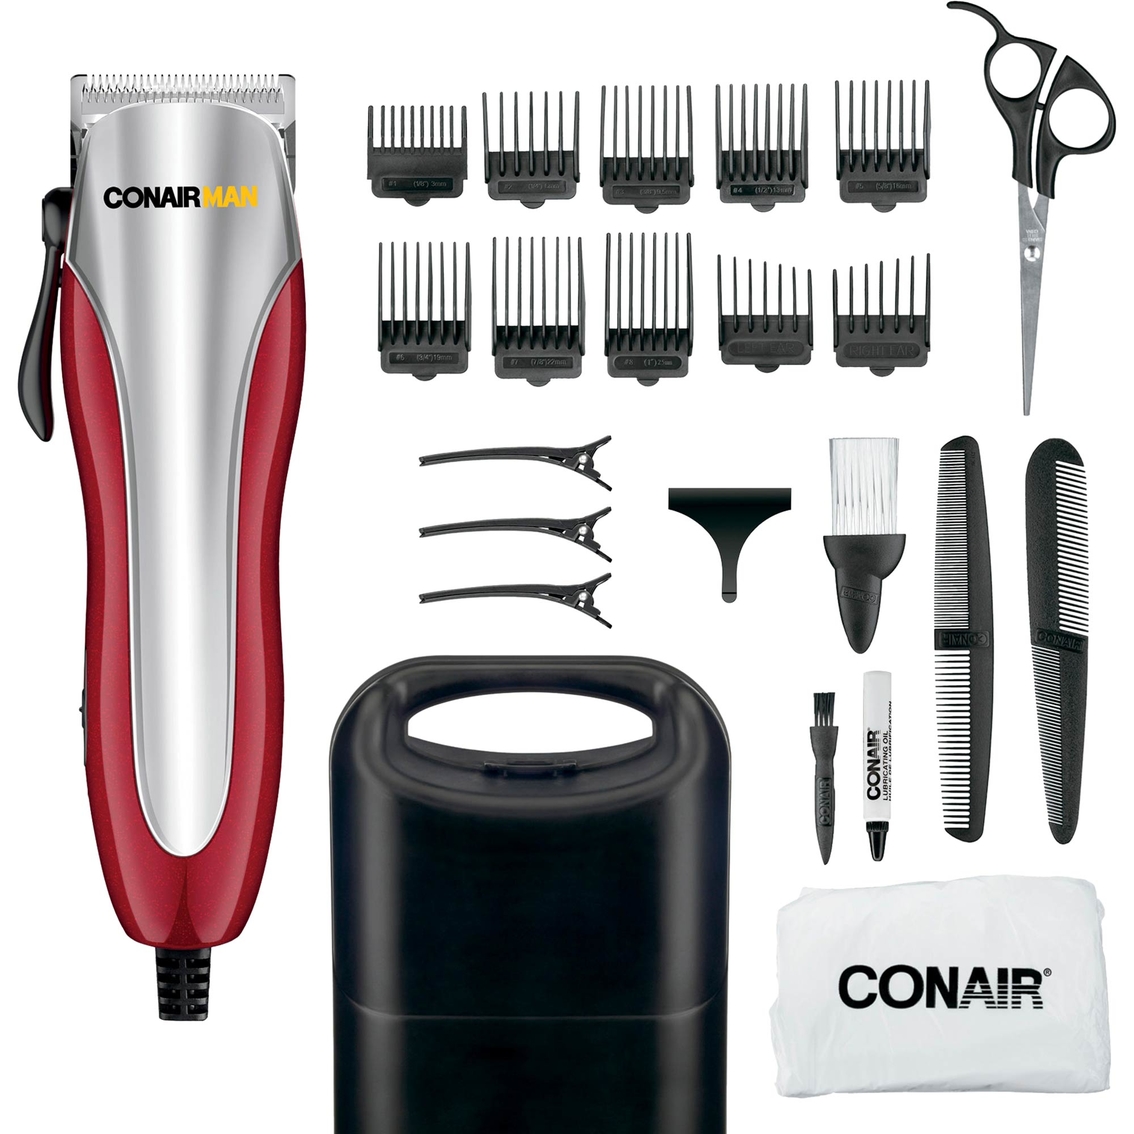 Conair Ultra Cut 23 pc. Haircut Kit with Detachable Blades - Image 3 of 4